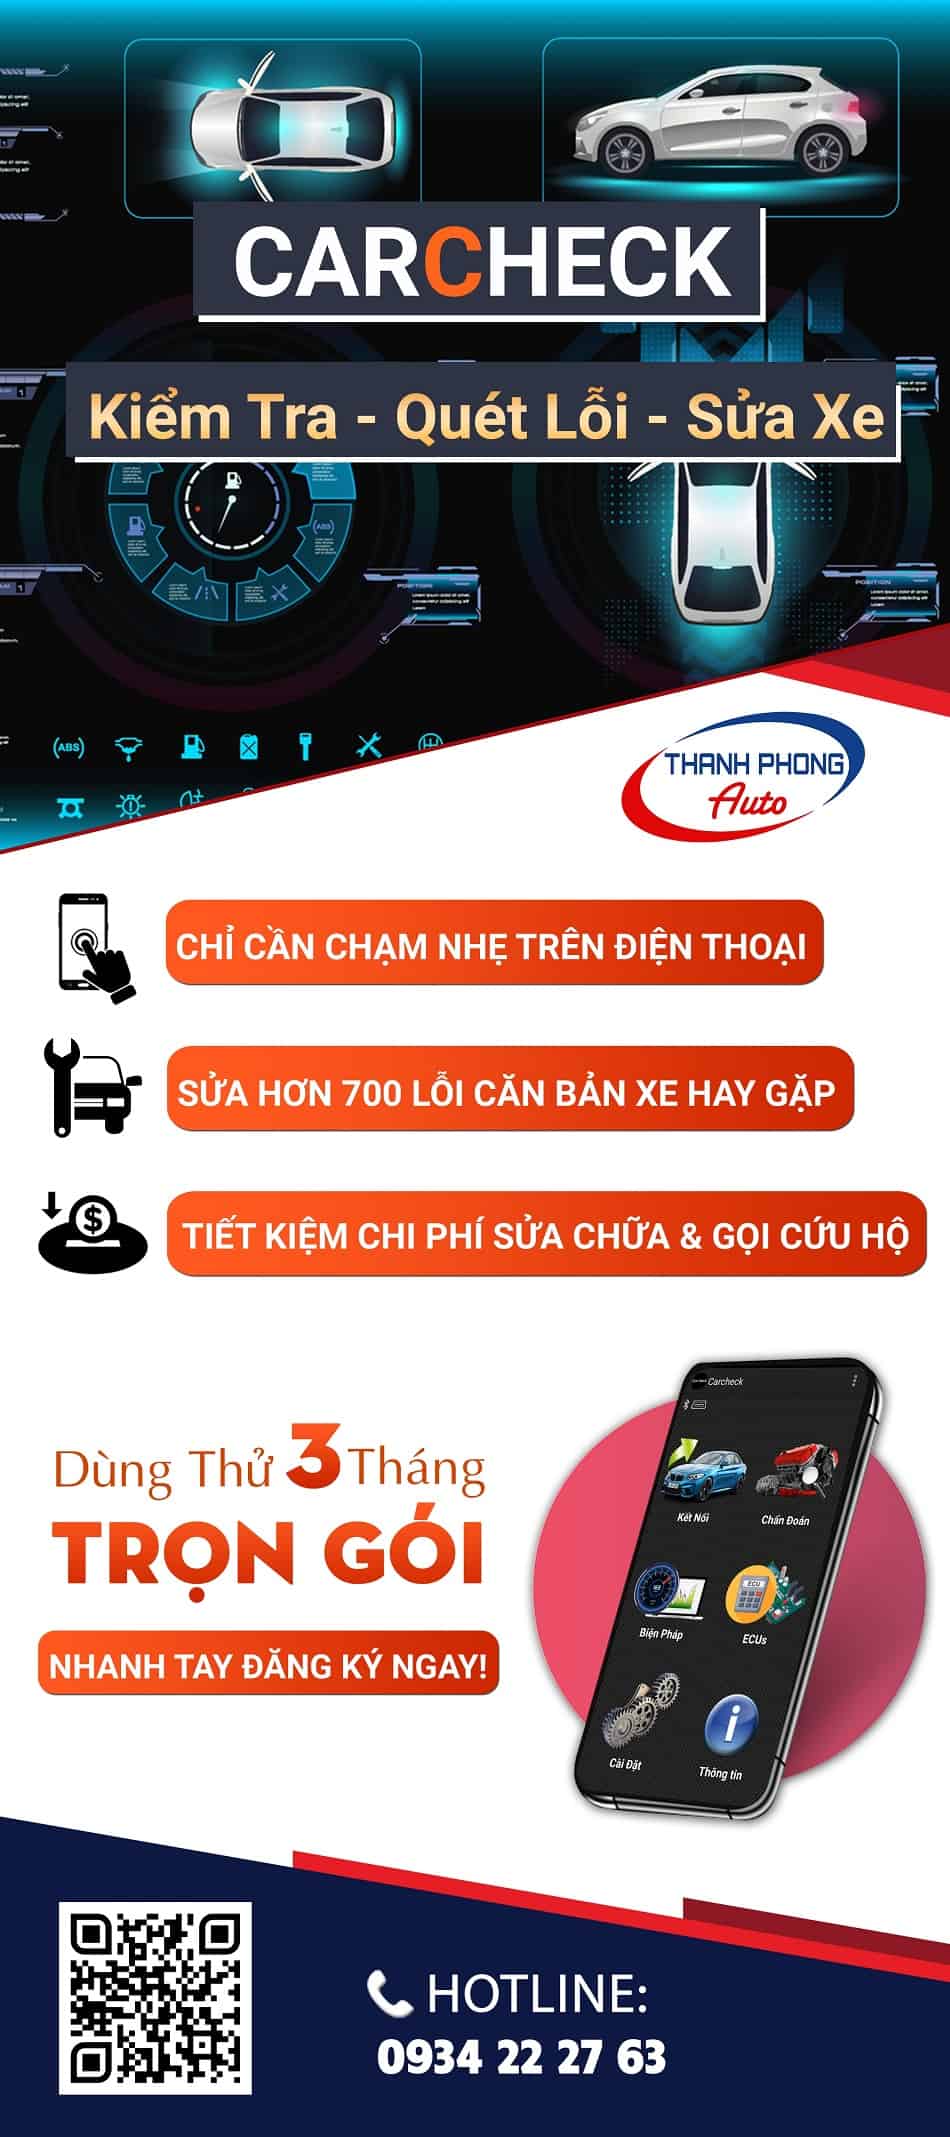 CARCHECK - Genuine Smart Car Repair and Error Scanning Application Garage Thanh Phong Auto HCM 2023